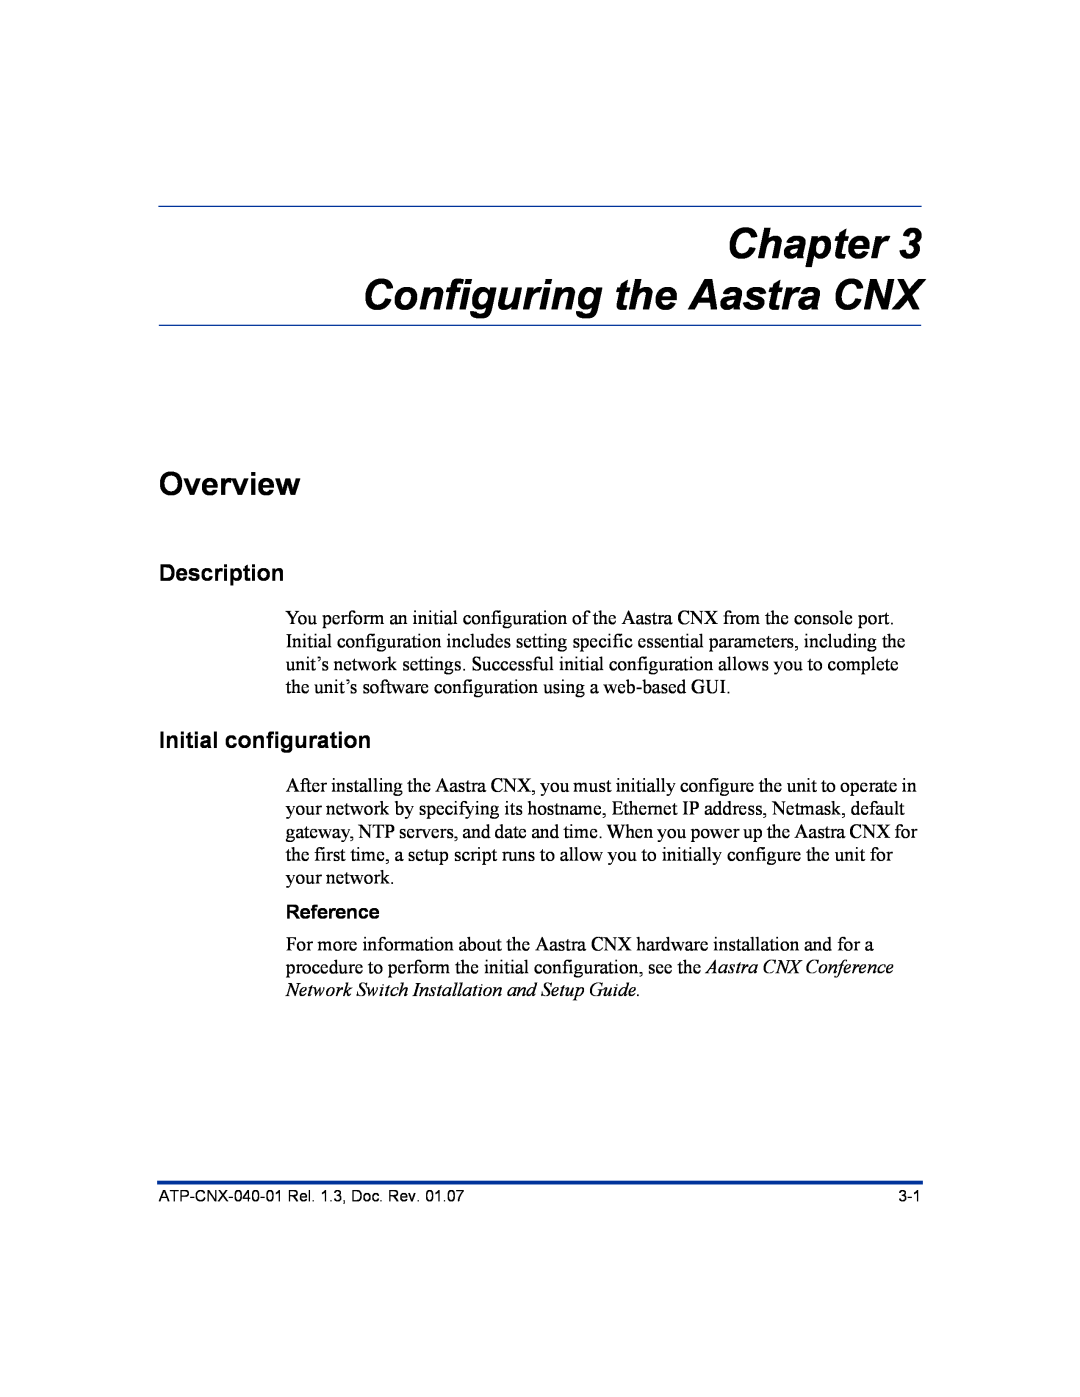 Aastra Telecom ATP-CNX-040-01 Chapter Configuring the Aastra CNX, Initial configuration, Overview, Description, Reference 